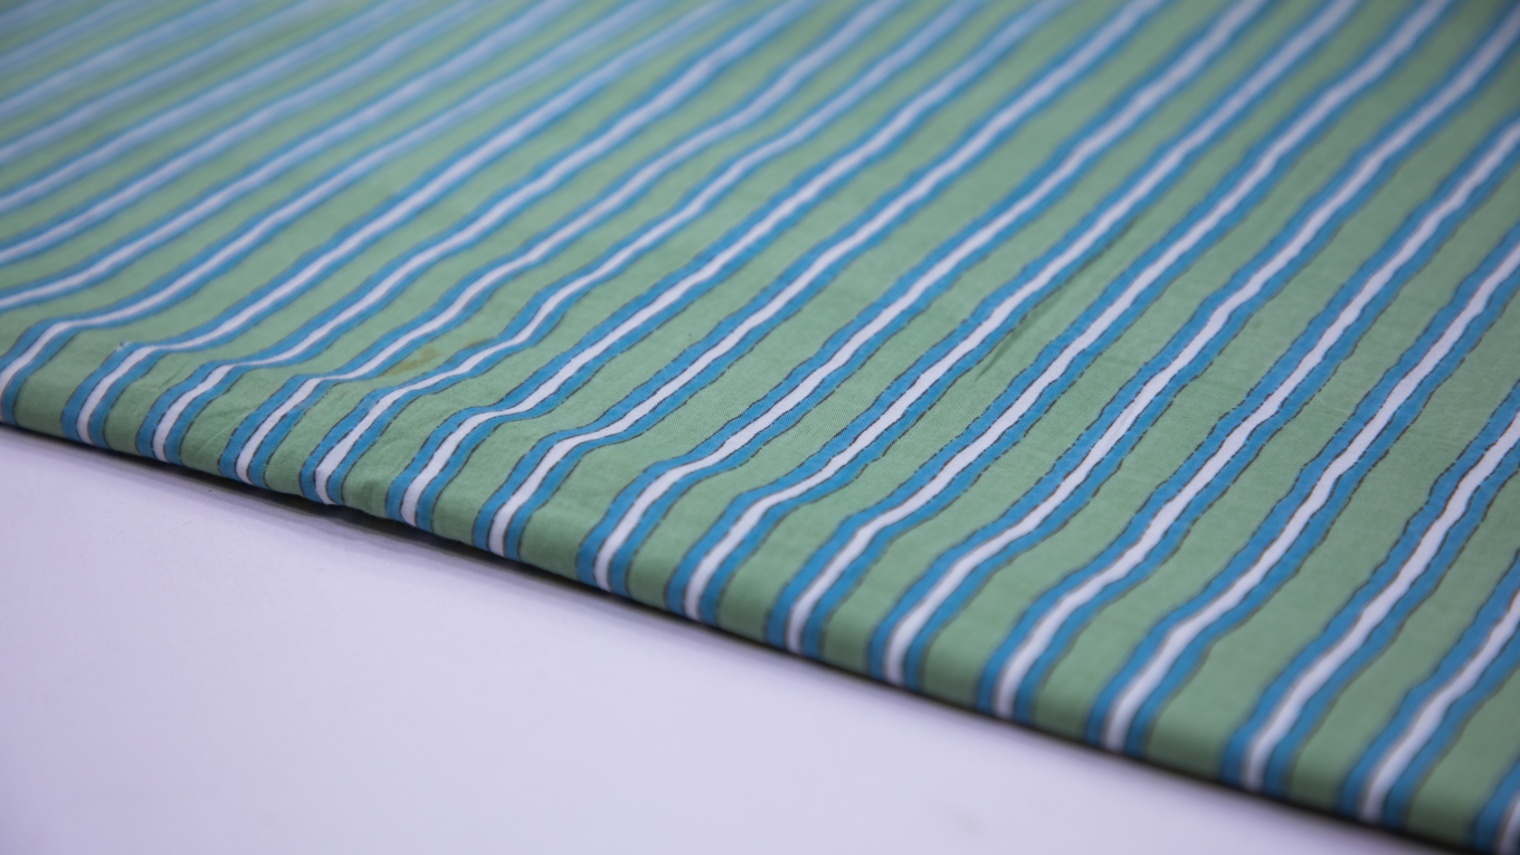 TEAL GREEN COLOR COTTON SCREEN PRINT STRIPES PATTERN FABRIC - 4571